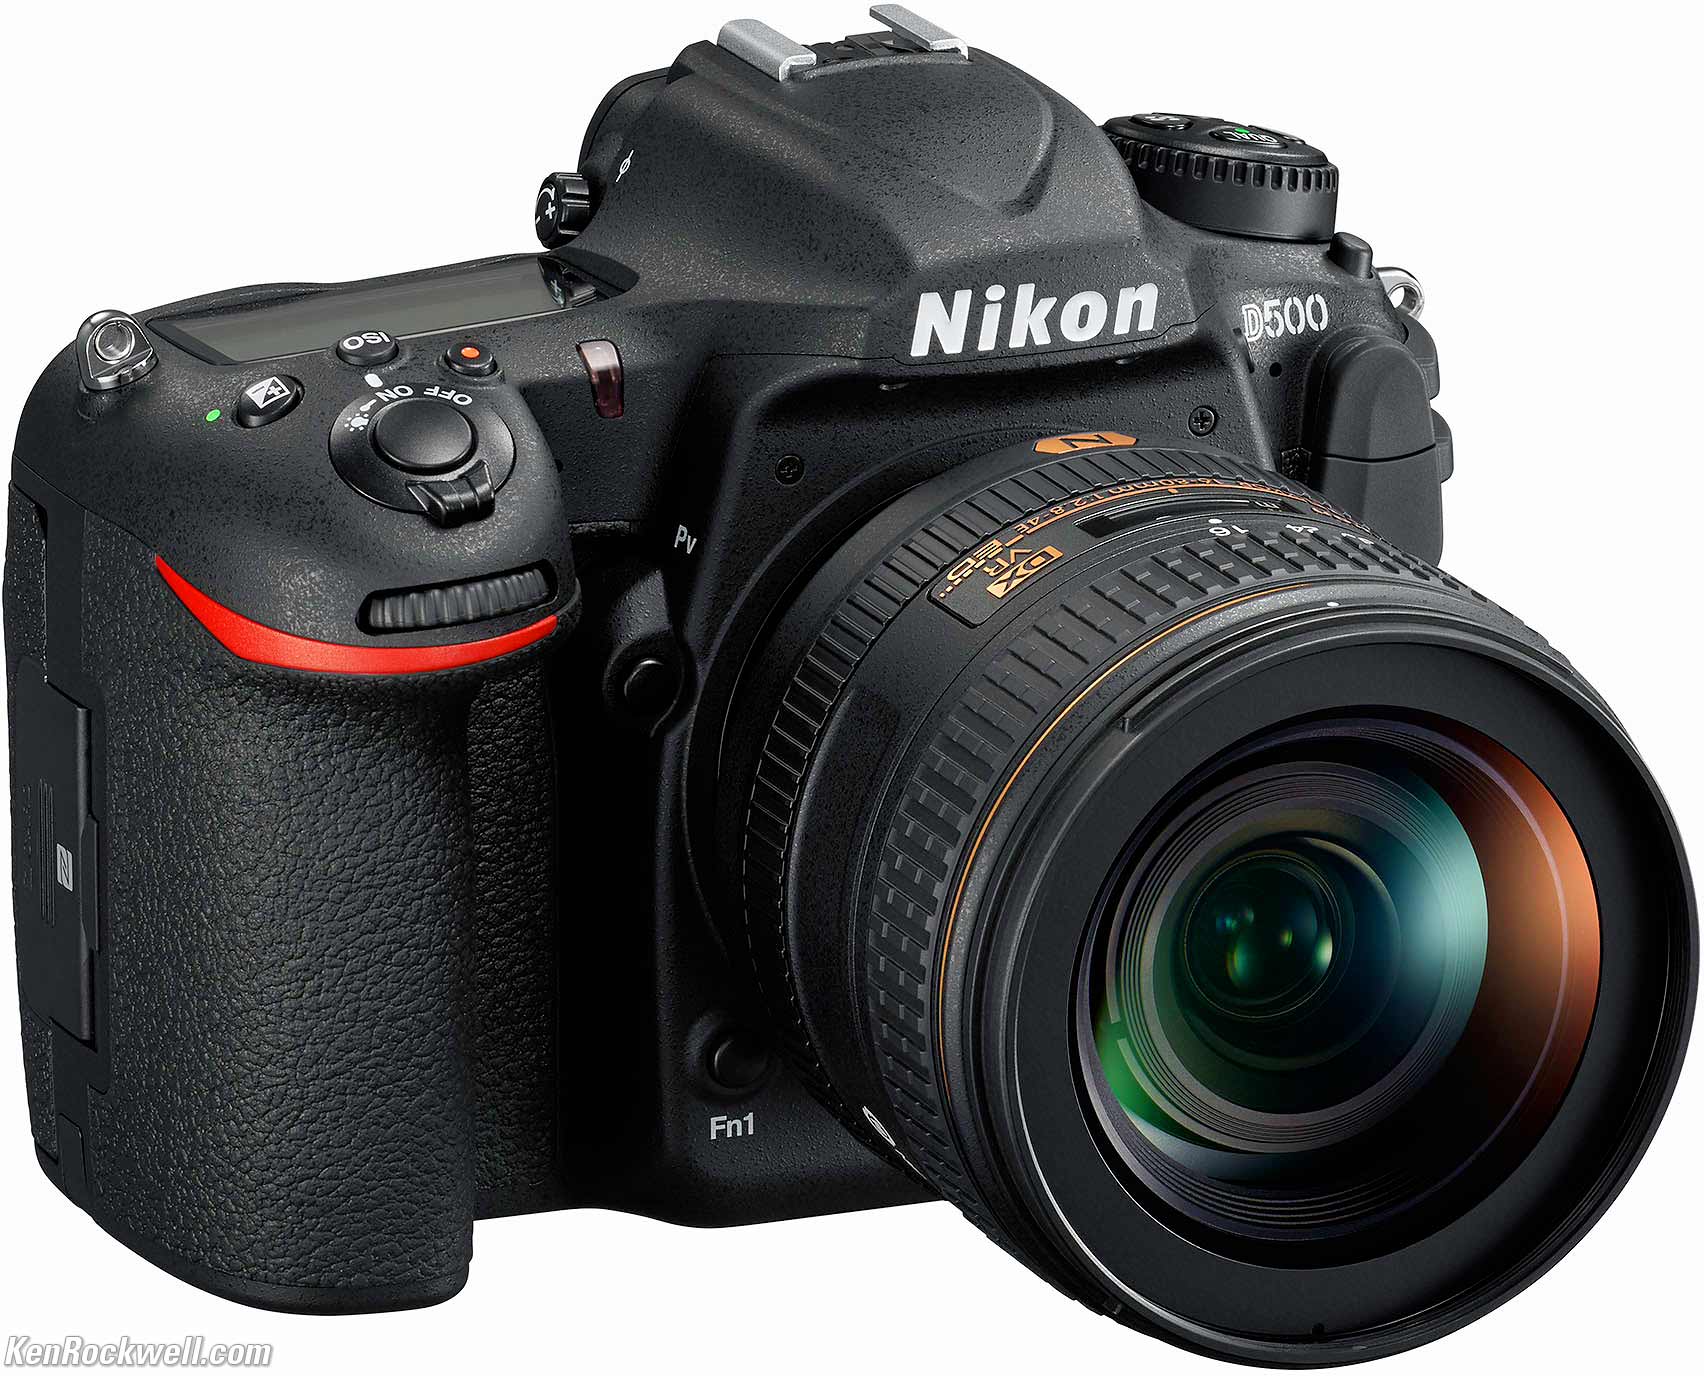 How to download pictures from my nikon coolpix camera to my computer